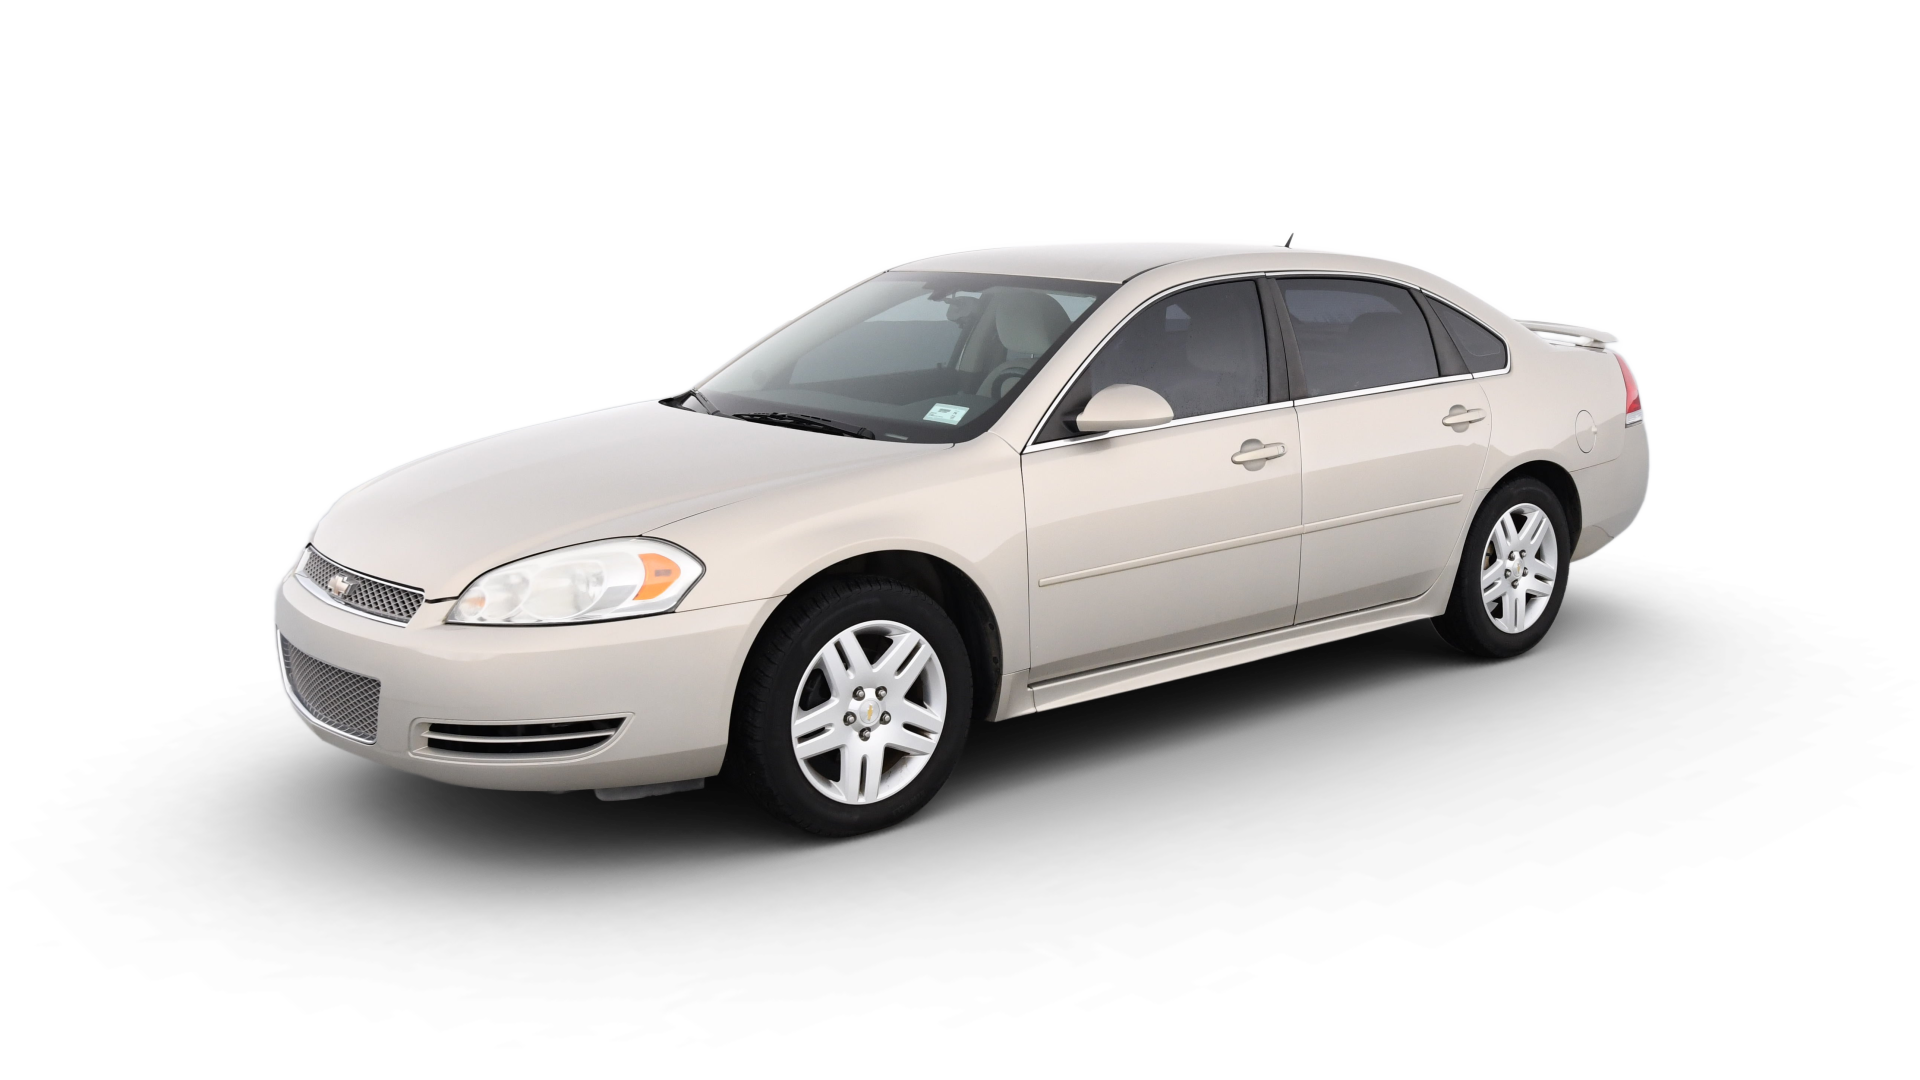 Used Chevrolet Impala For Sale Online | Carvana